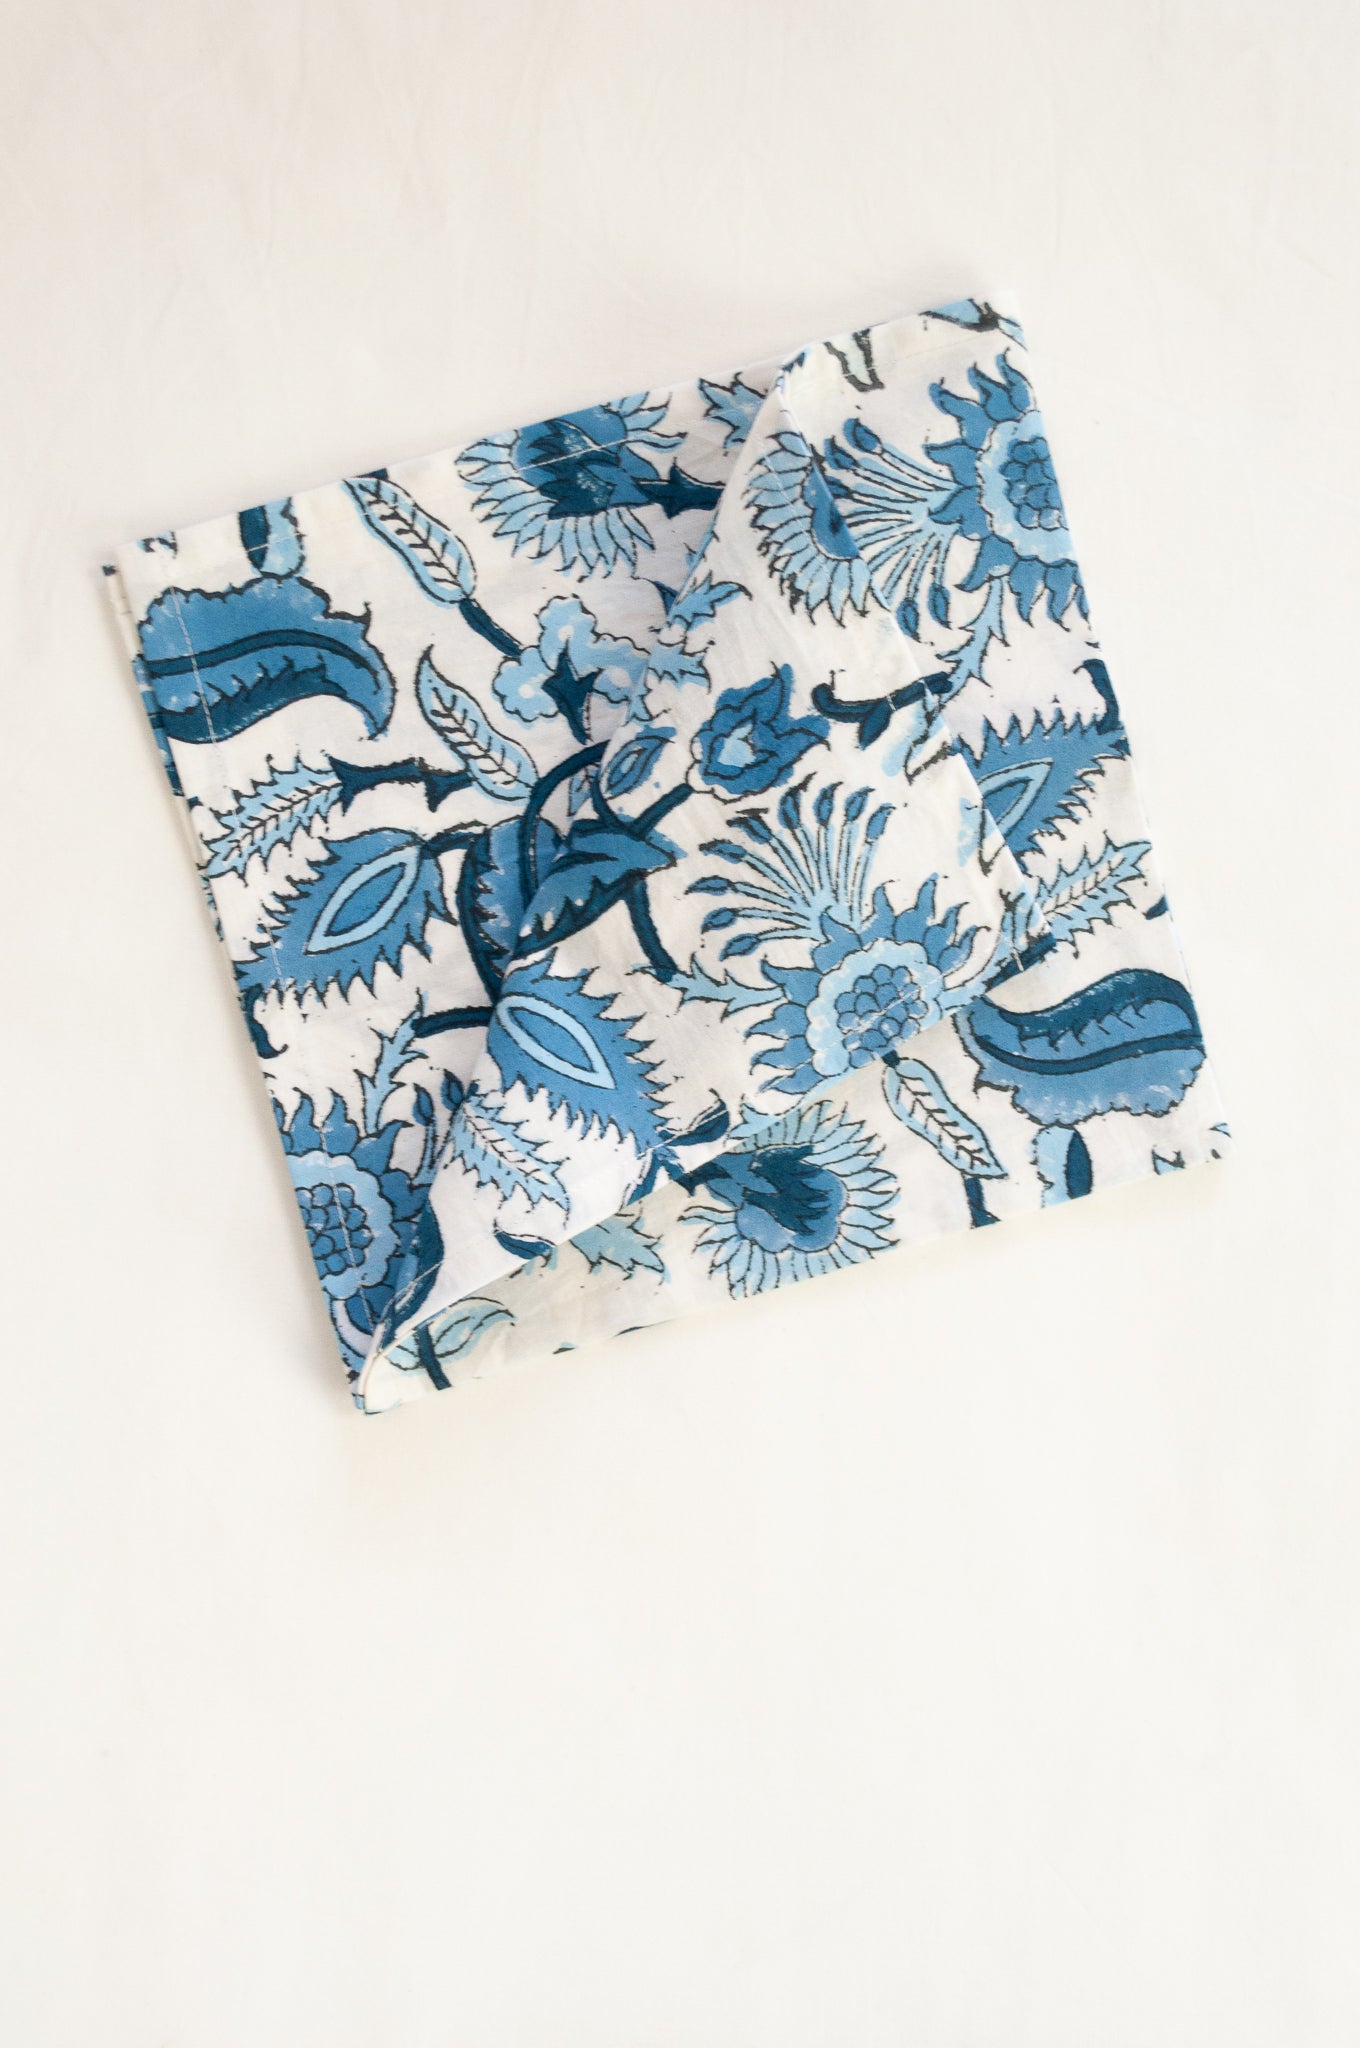 Ethically made artisan block print pure cotton napkin set, shades of blue on white floral design.